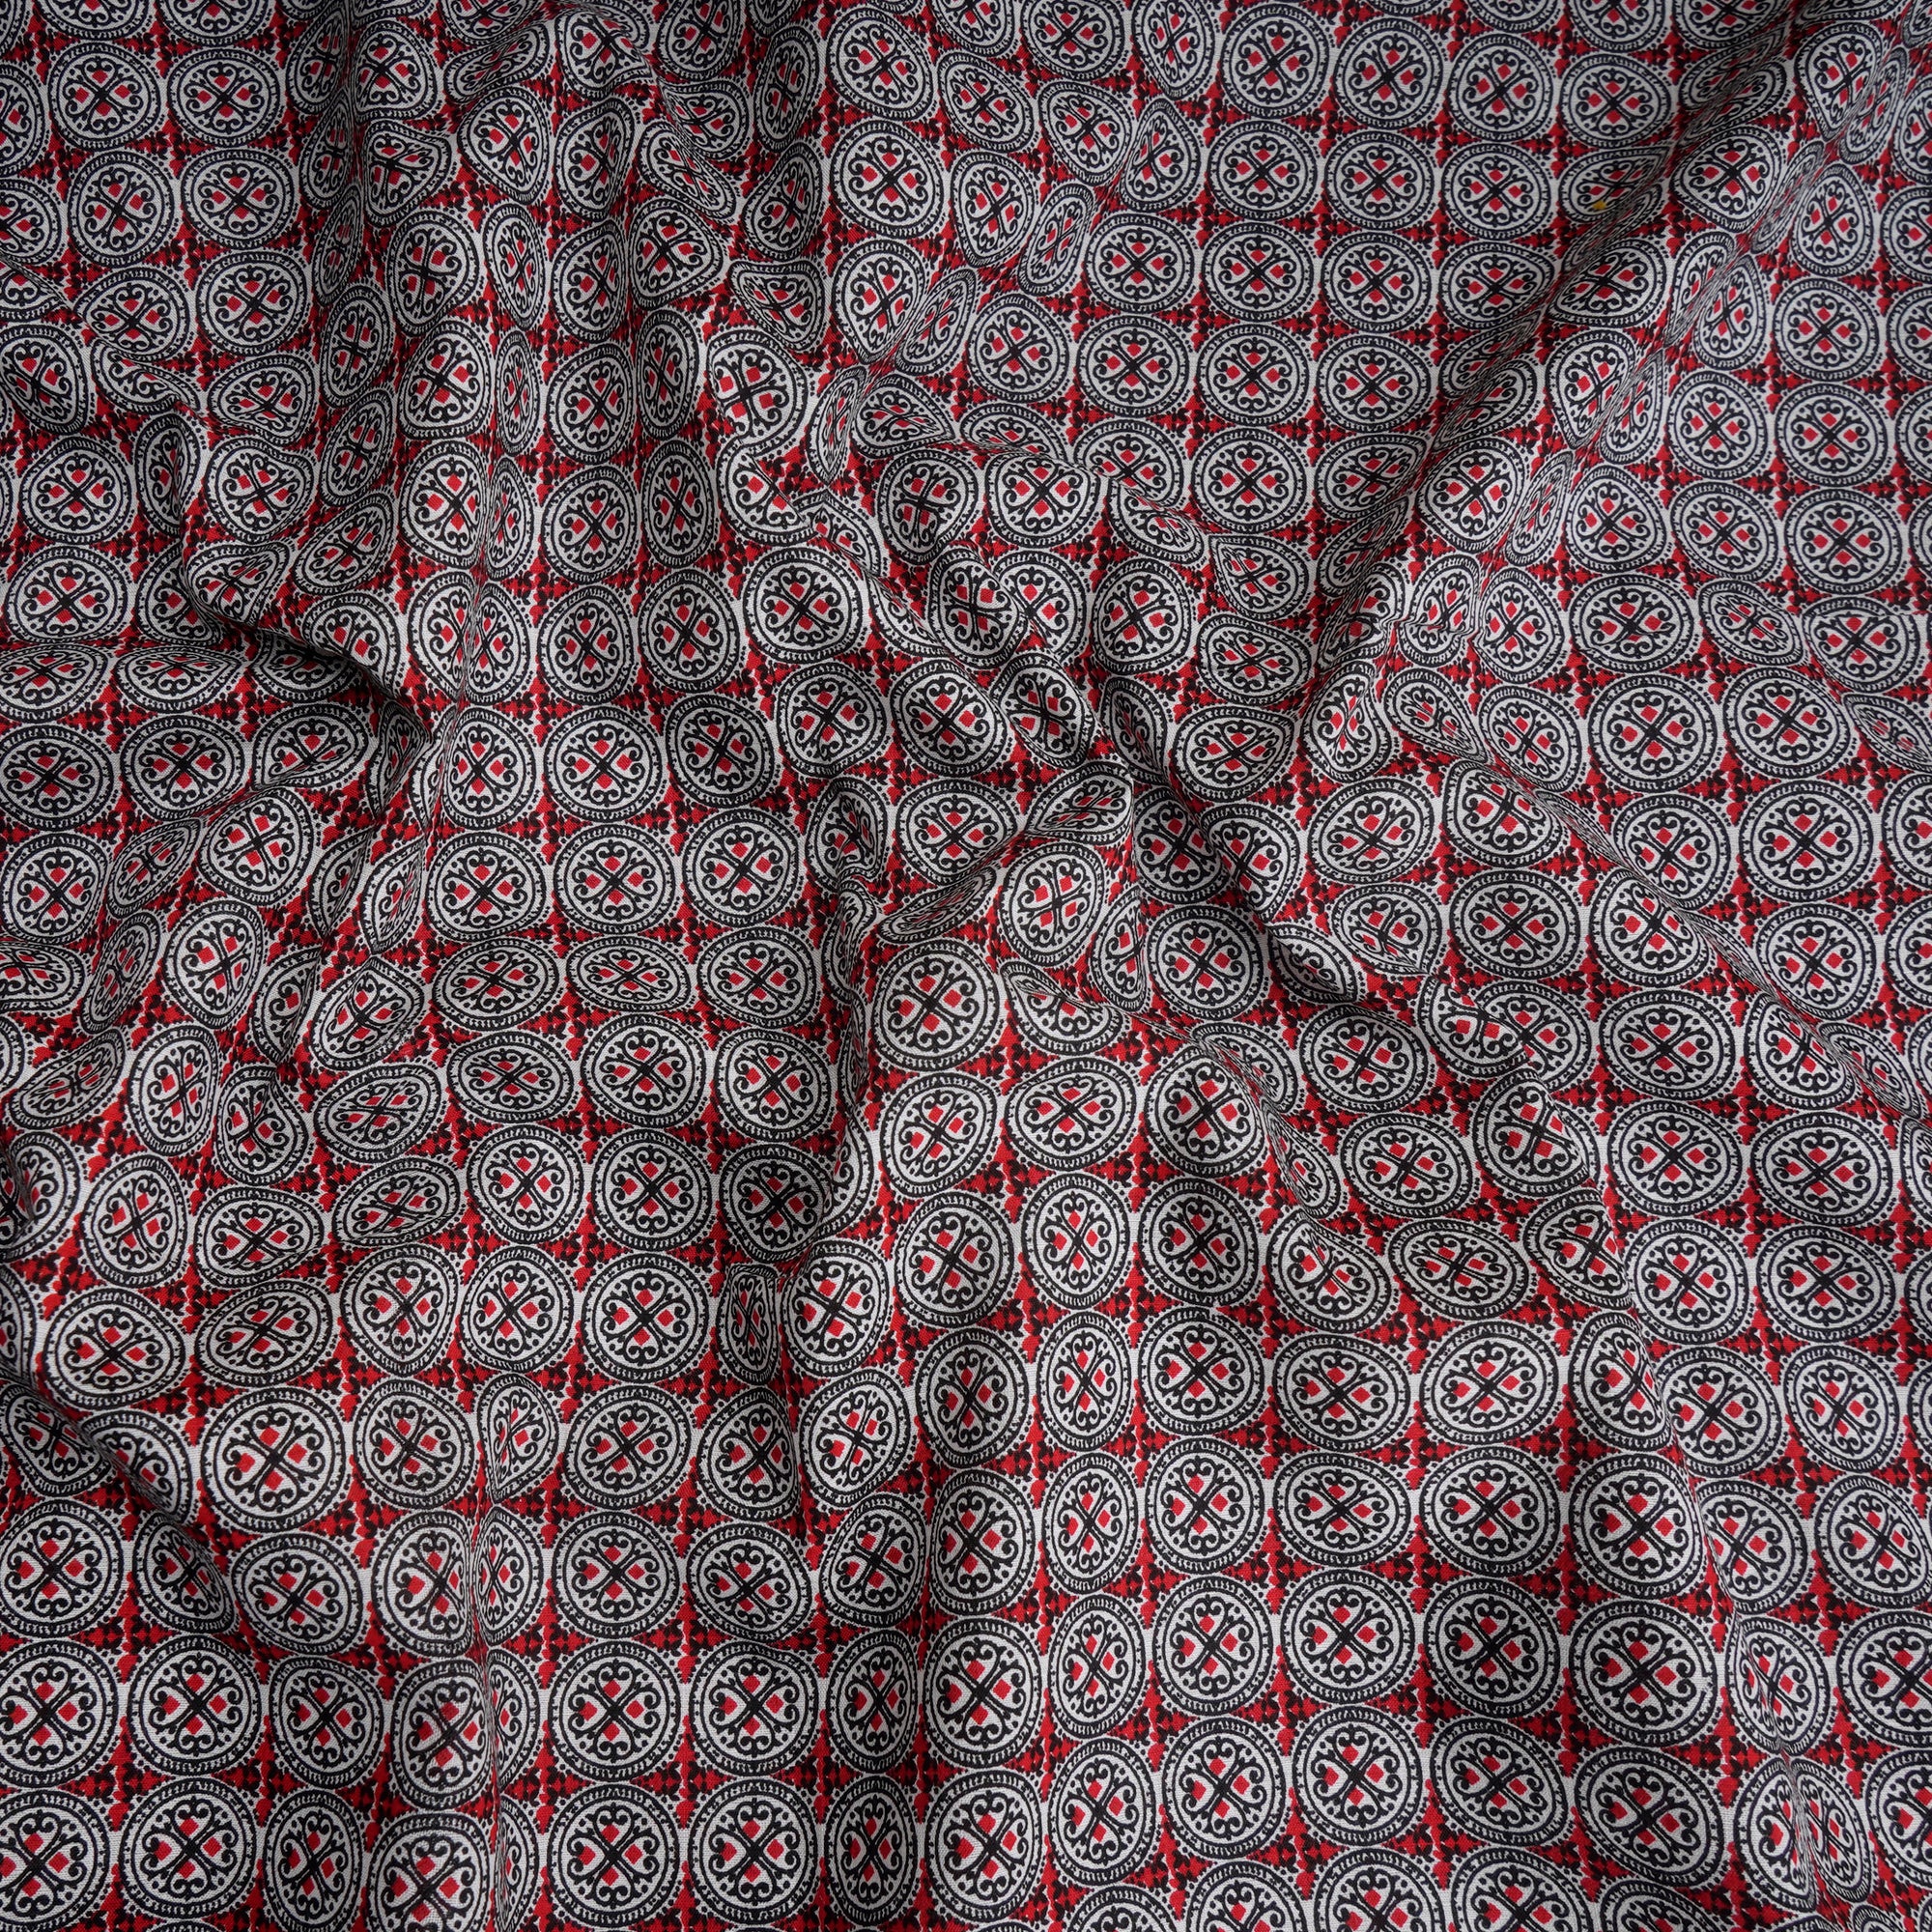 Red-Black Color Printed Cambric Cotton Fabric